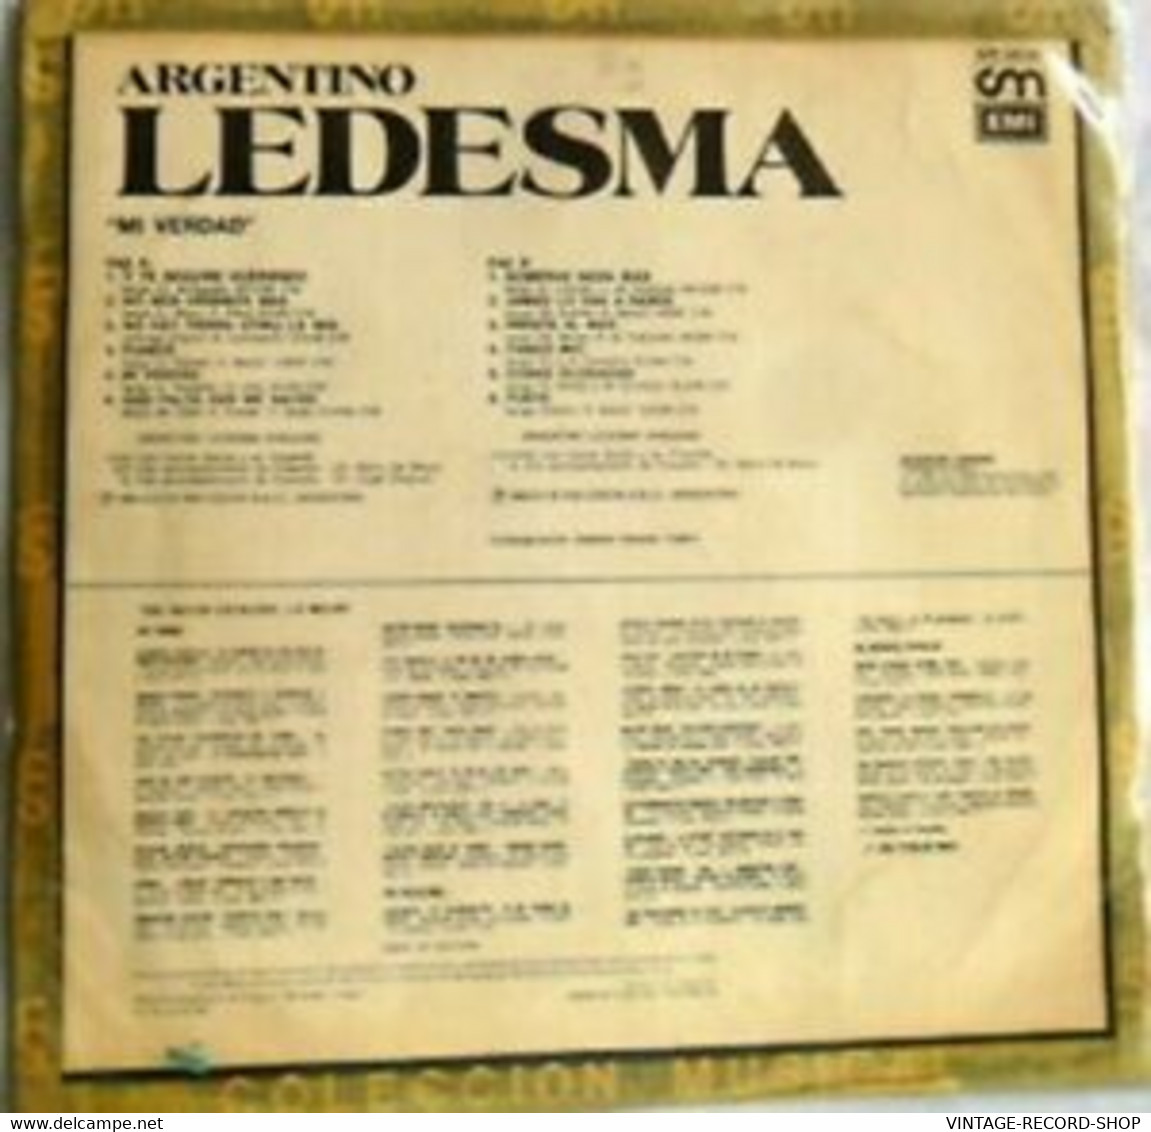 ARGENTINO LEDESMA *MI VERDAD* INV No: 152817 RELEASED DATE: 1968 - Other - Spanish Music